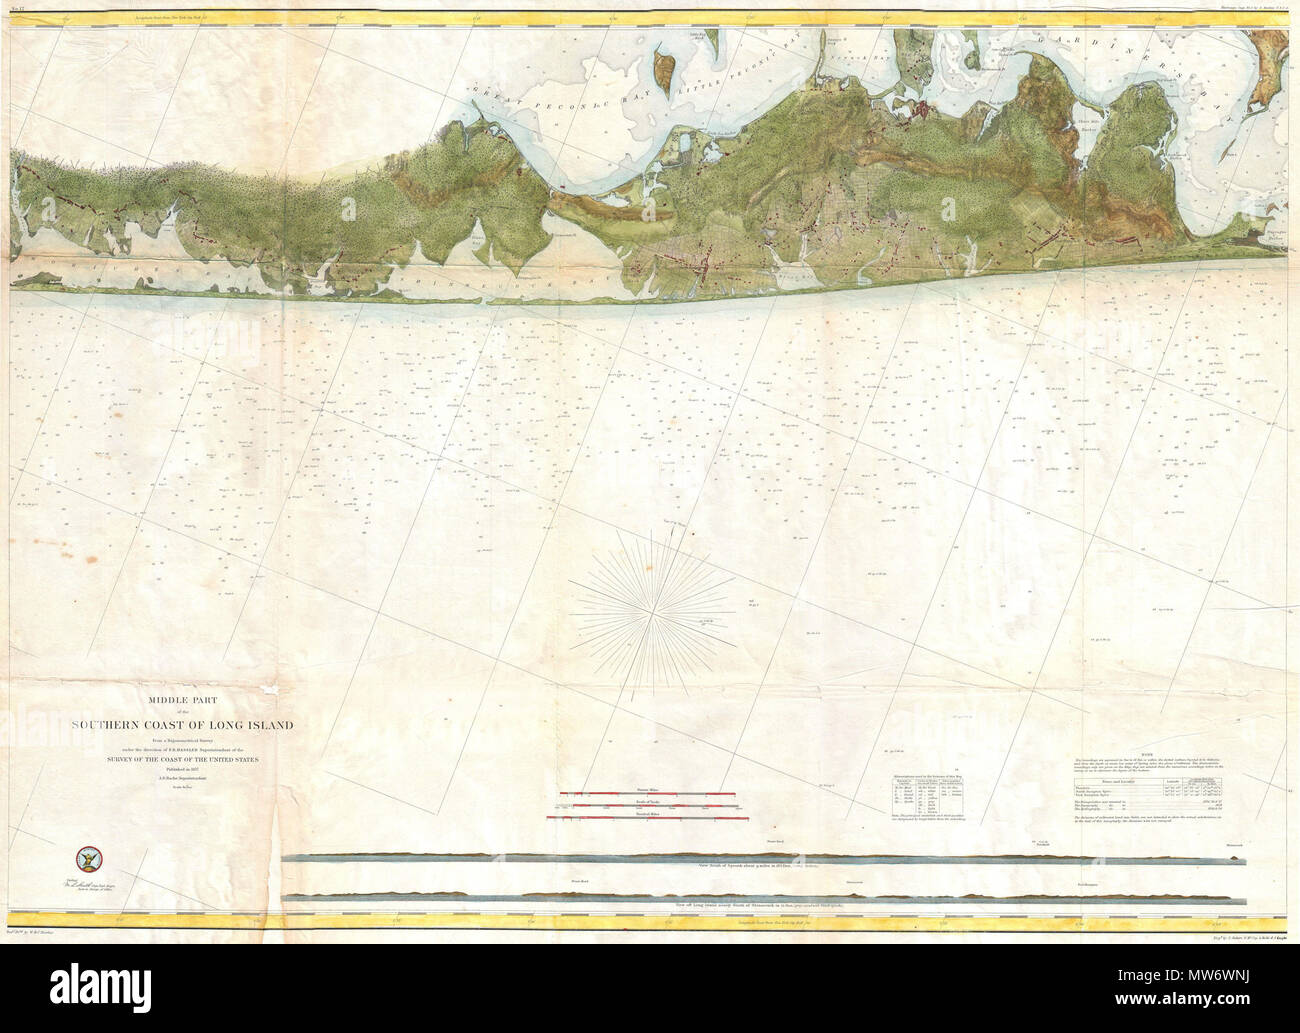 . Middle Part of the Southern Coast of Long Island.  English: This is an extraordinary and extremely rare hand colored large format 1857 U.S. Coast Survey sea chart or map depicting southeastern Long Island, New York. Details part of Suffolk County from Moriches Bay to Napeague Harbor, including the summer getaways of Sag Harbor, East Hampton, Southampton (South Hampton), Quogue, Bridgehampton and Amagansett, among others. Extends as far north as Gardiner’s Island and Hog Neck. Inland regions are depicted in considerable detail, down to individual buildings. In addition to inland details, this Stock Photo